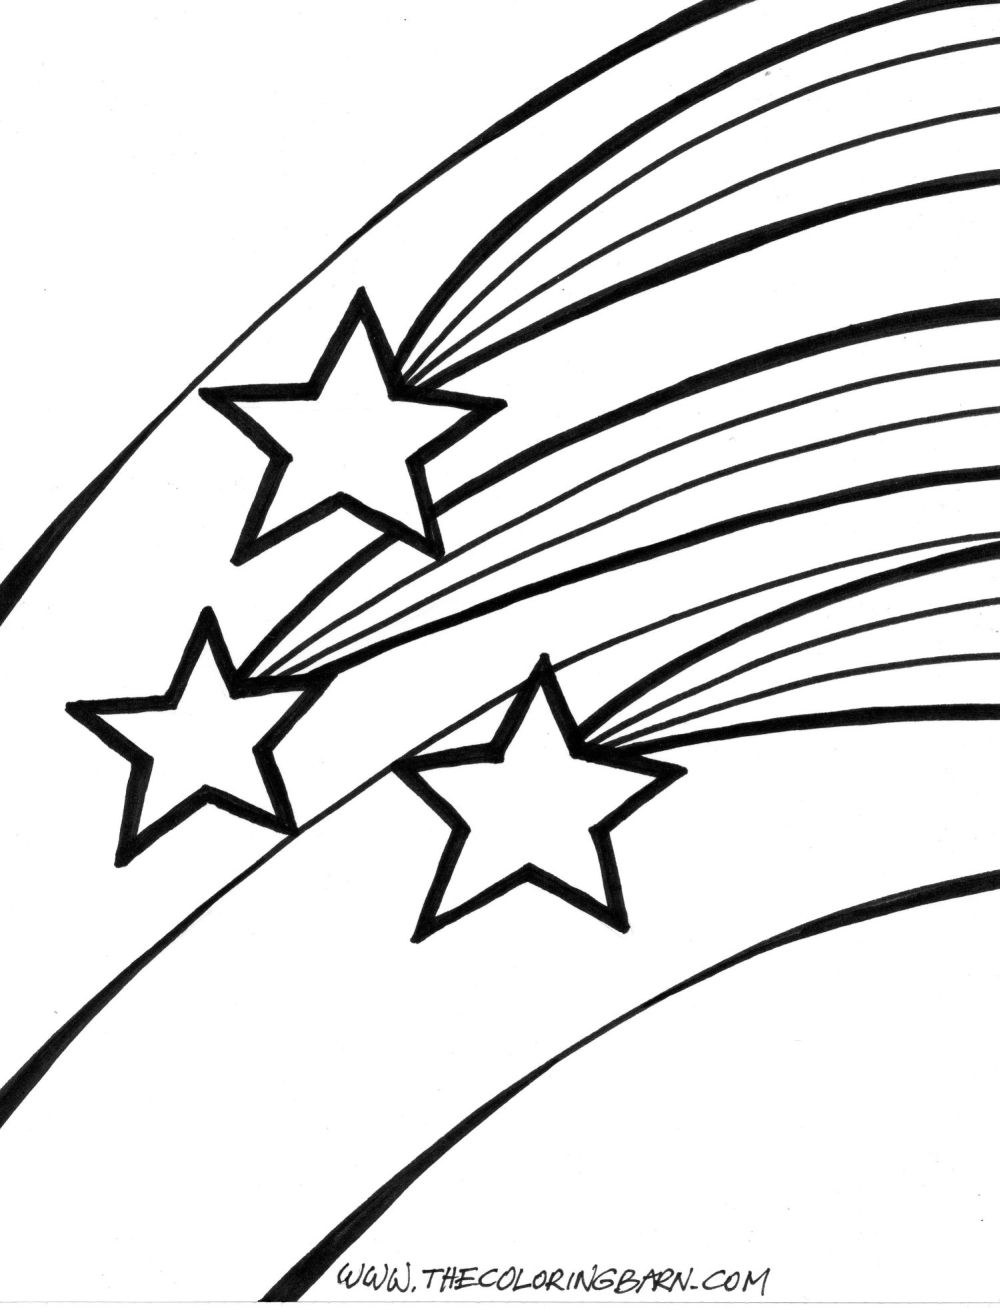 Shooting Star Line Drawing - ClipArt Best